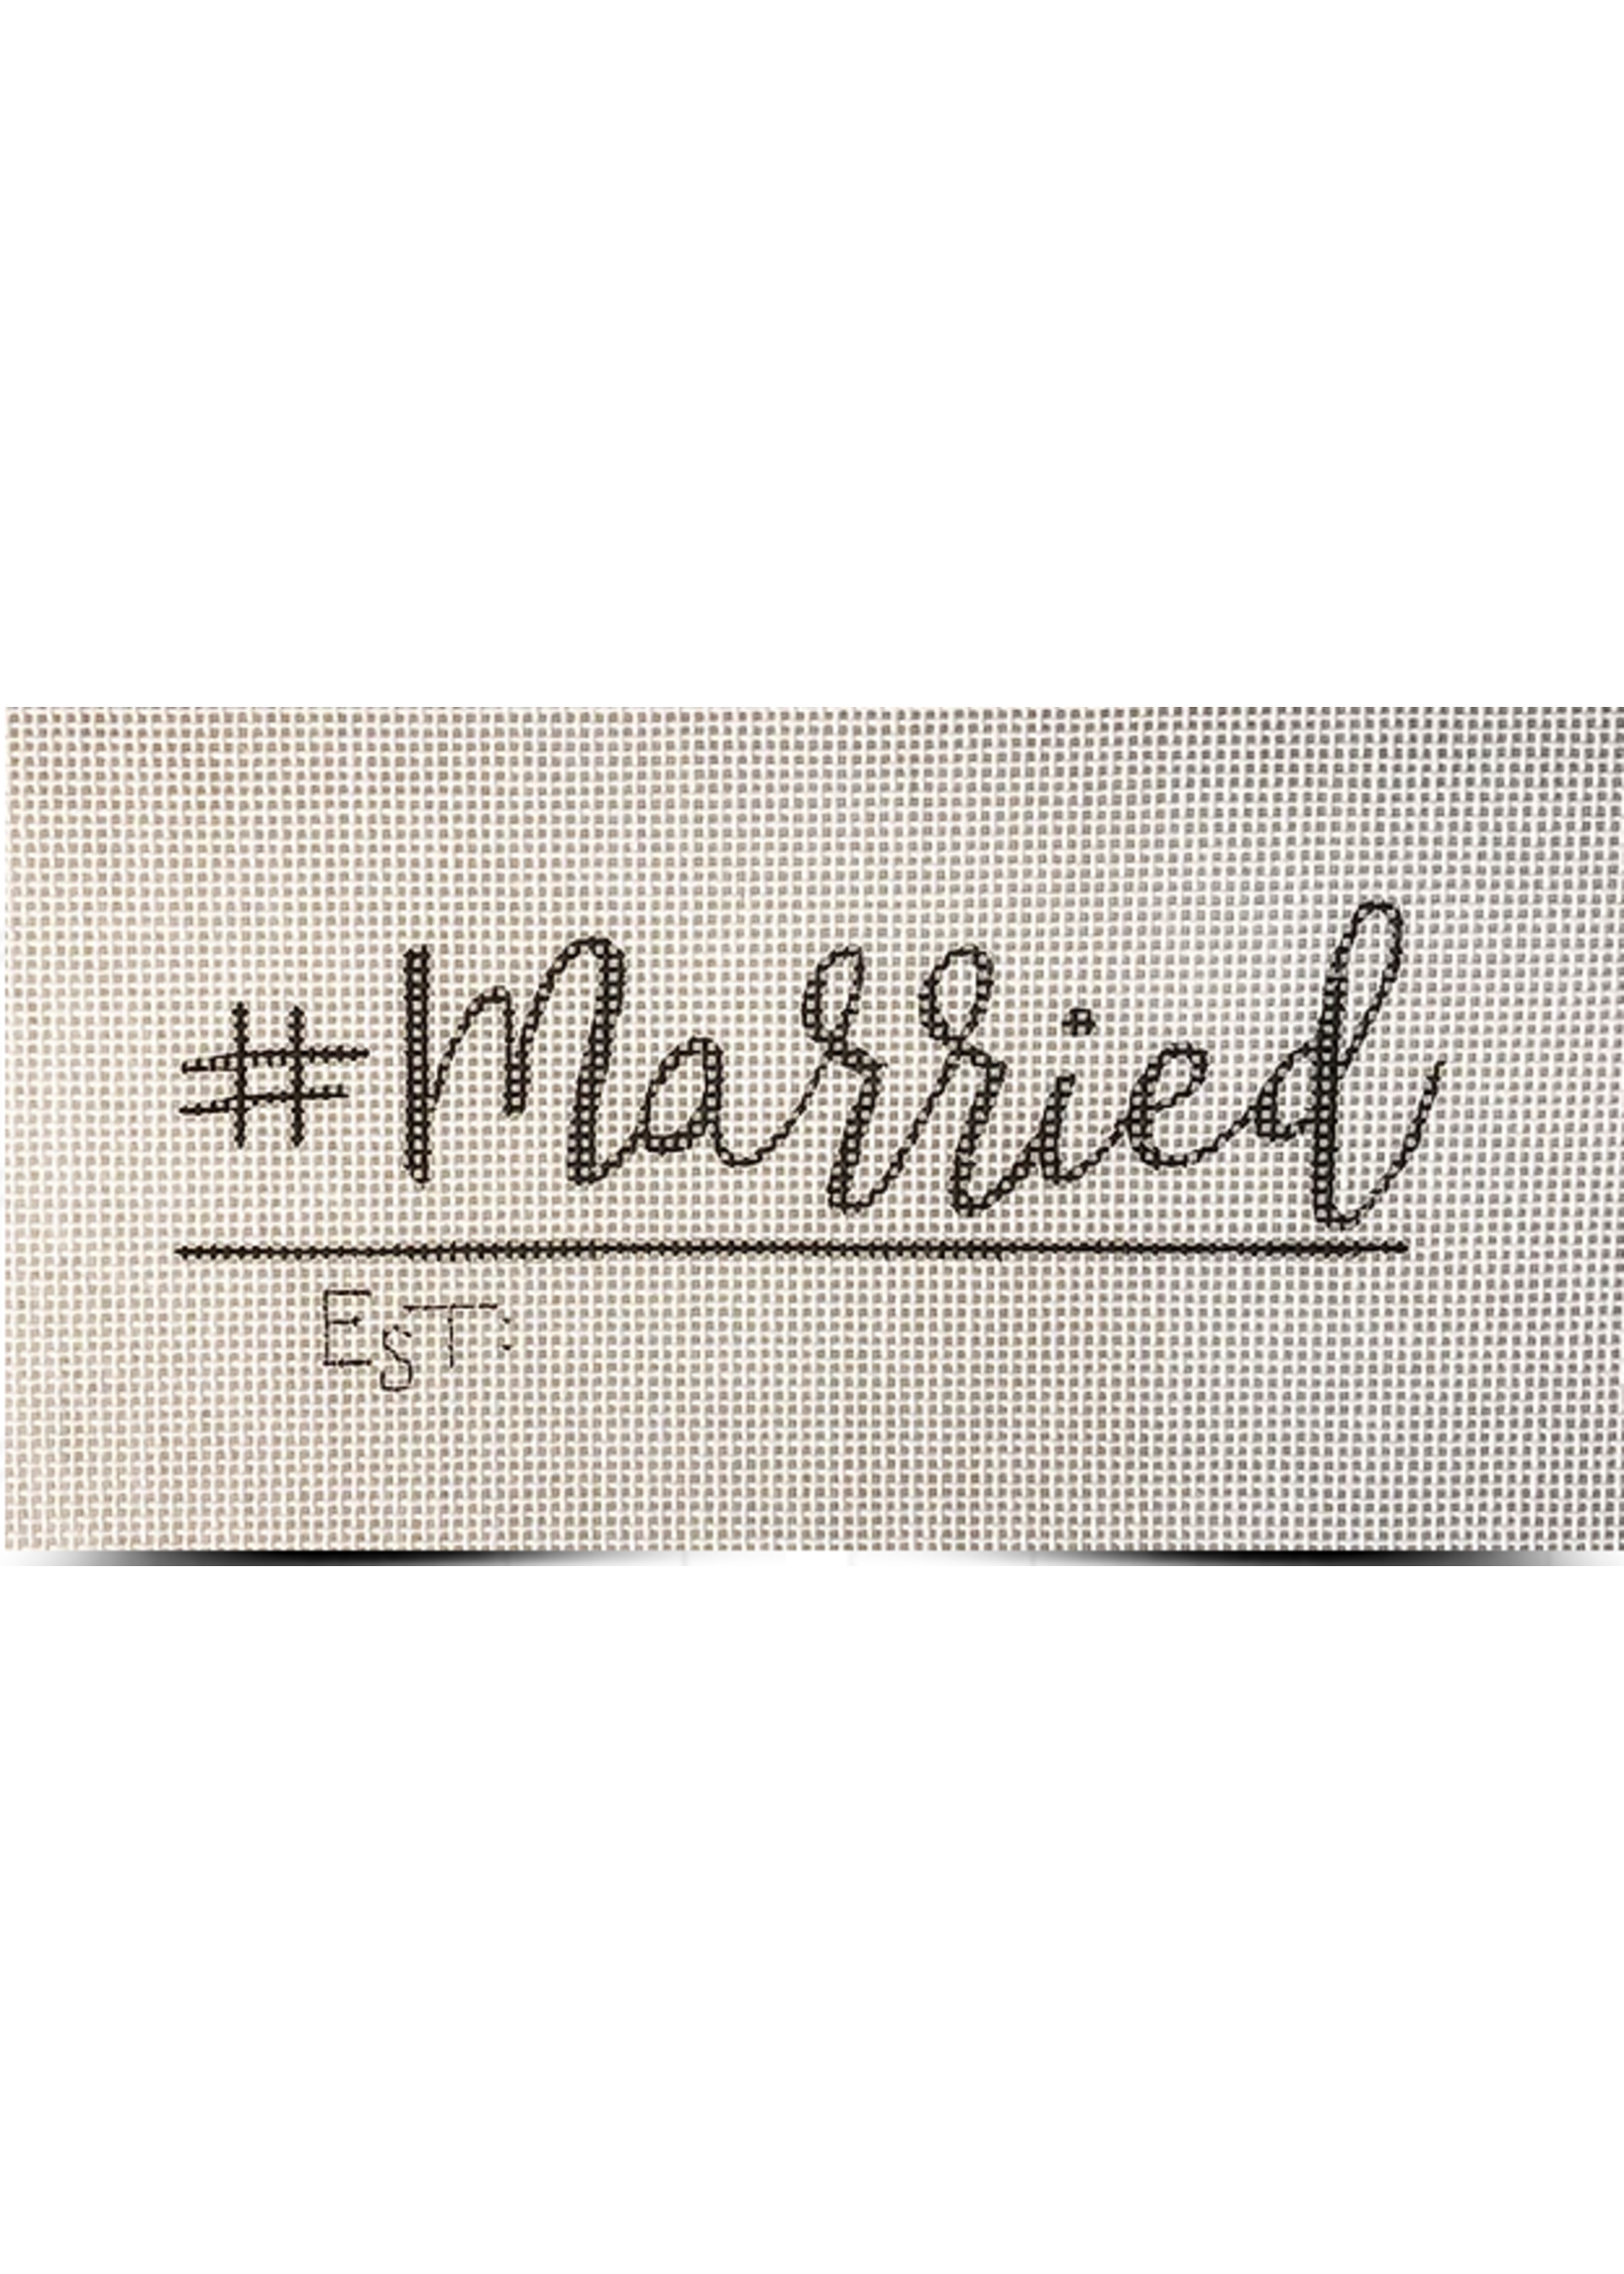 # Married MB11